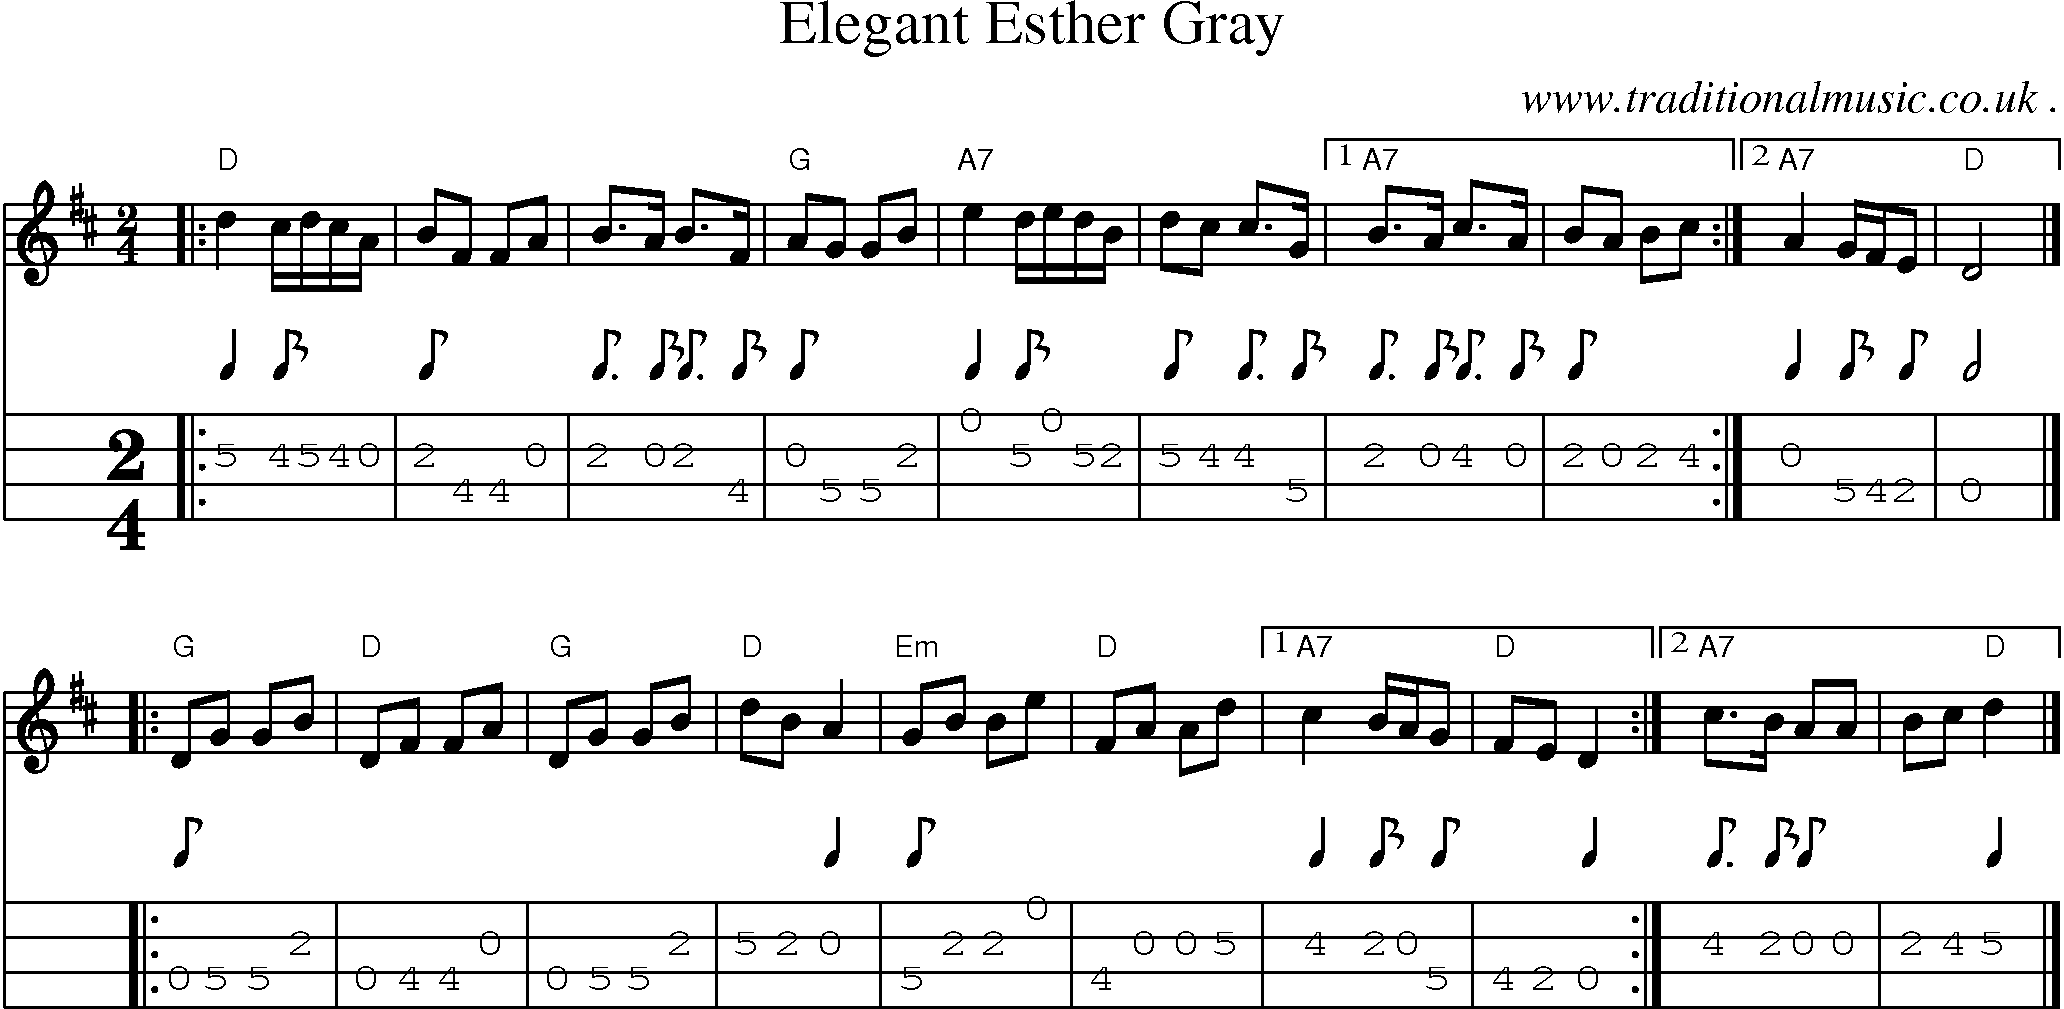 Sheet-music  score, Chords and Mandolin Tabs for Elegant Esther Gray